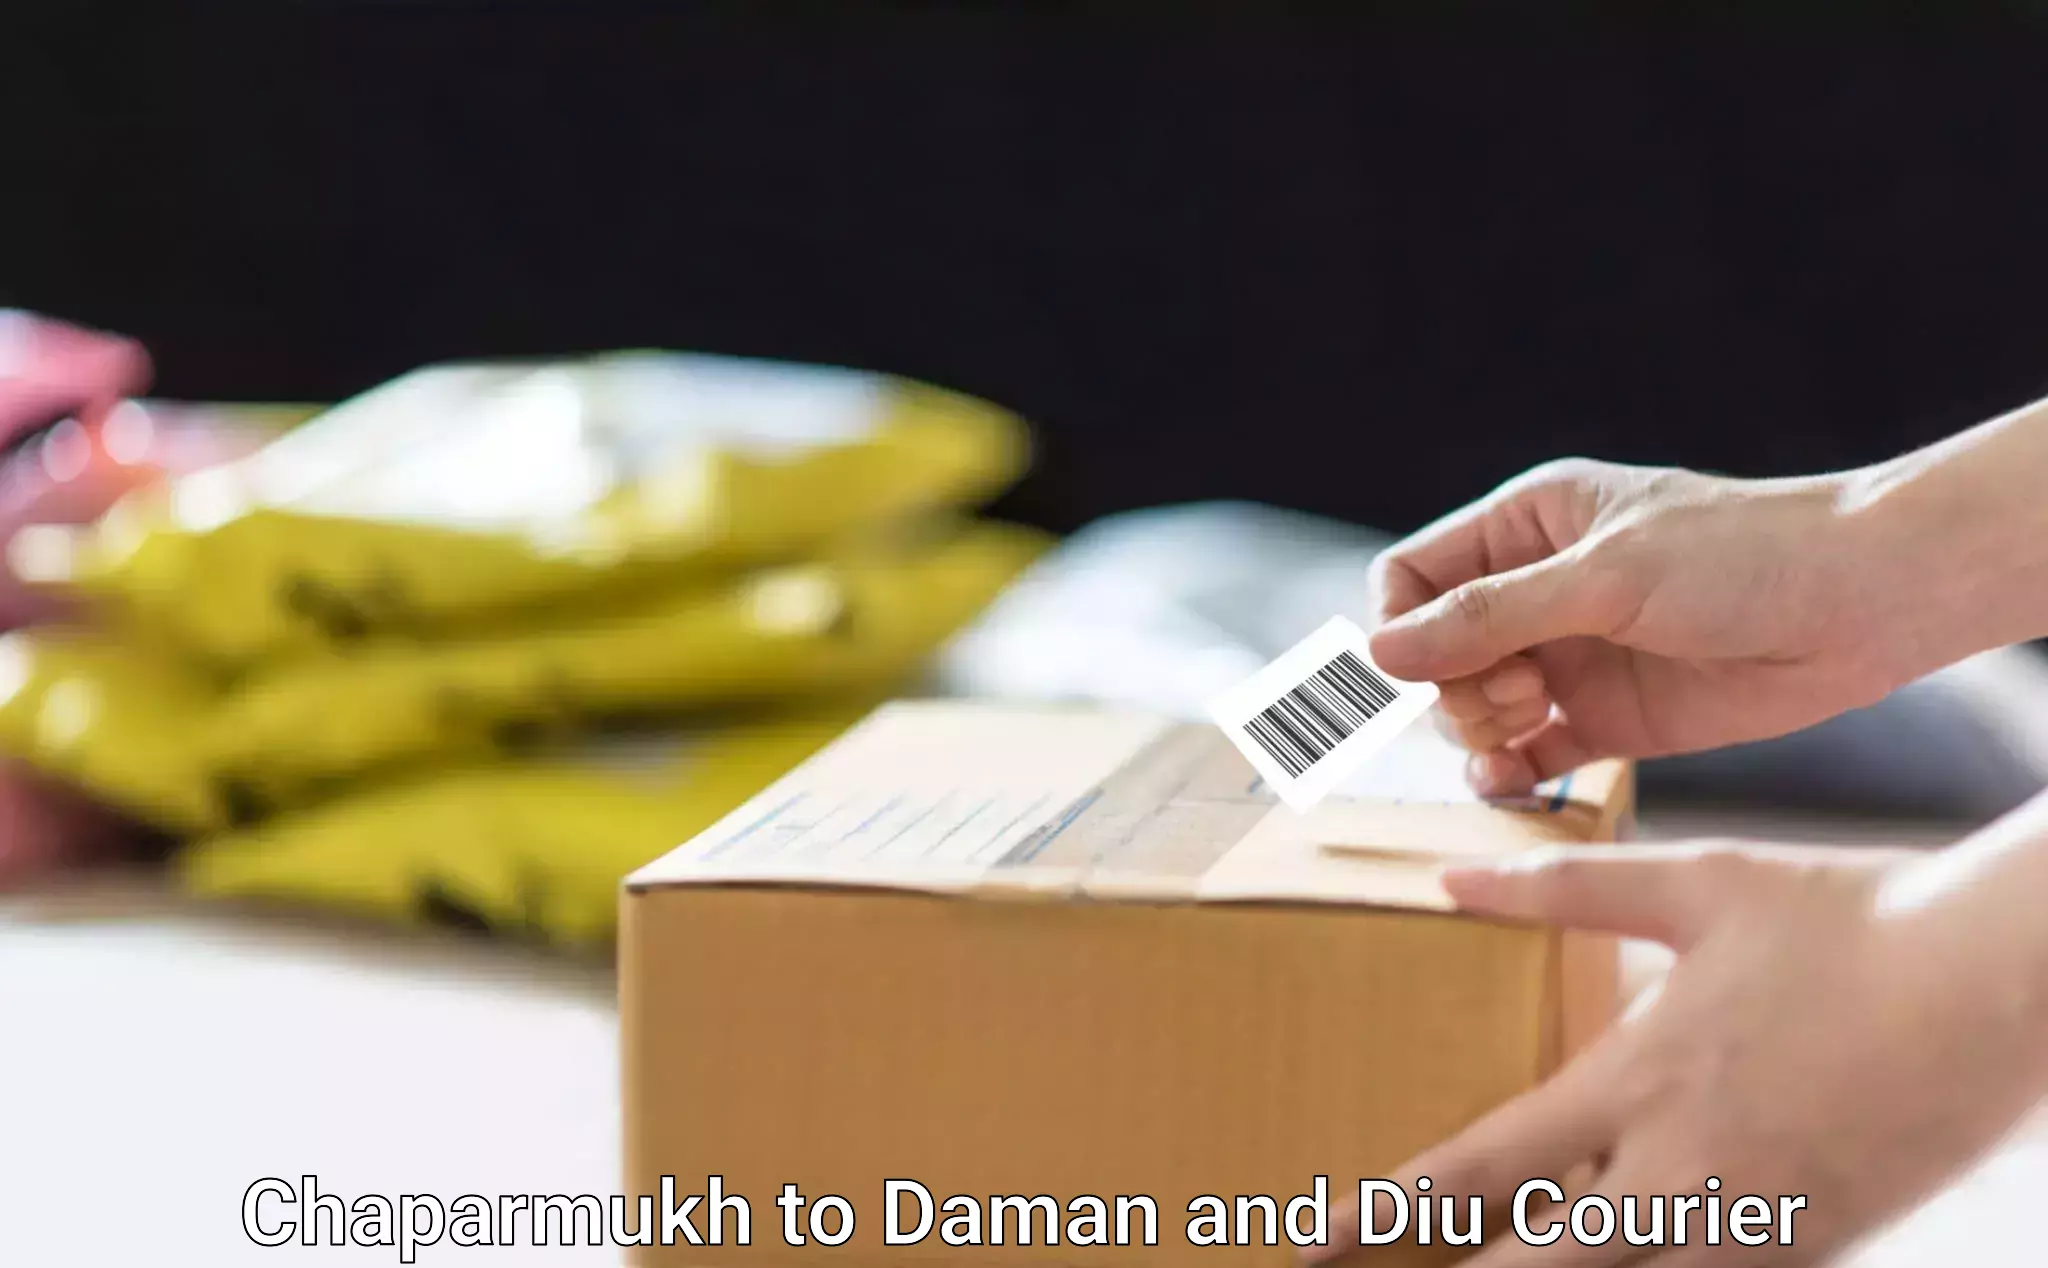 Customizable shipping options in Chaparmukh to Daman and Diu